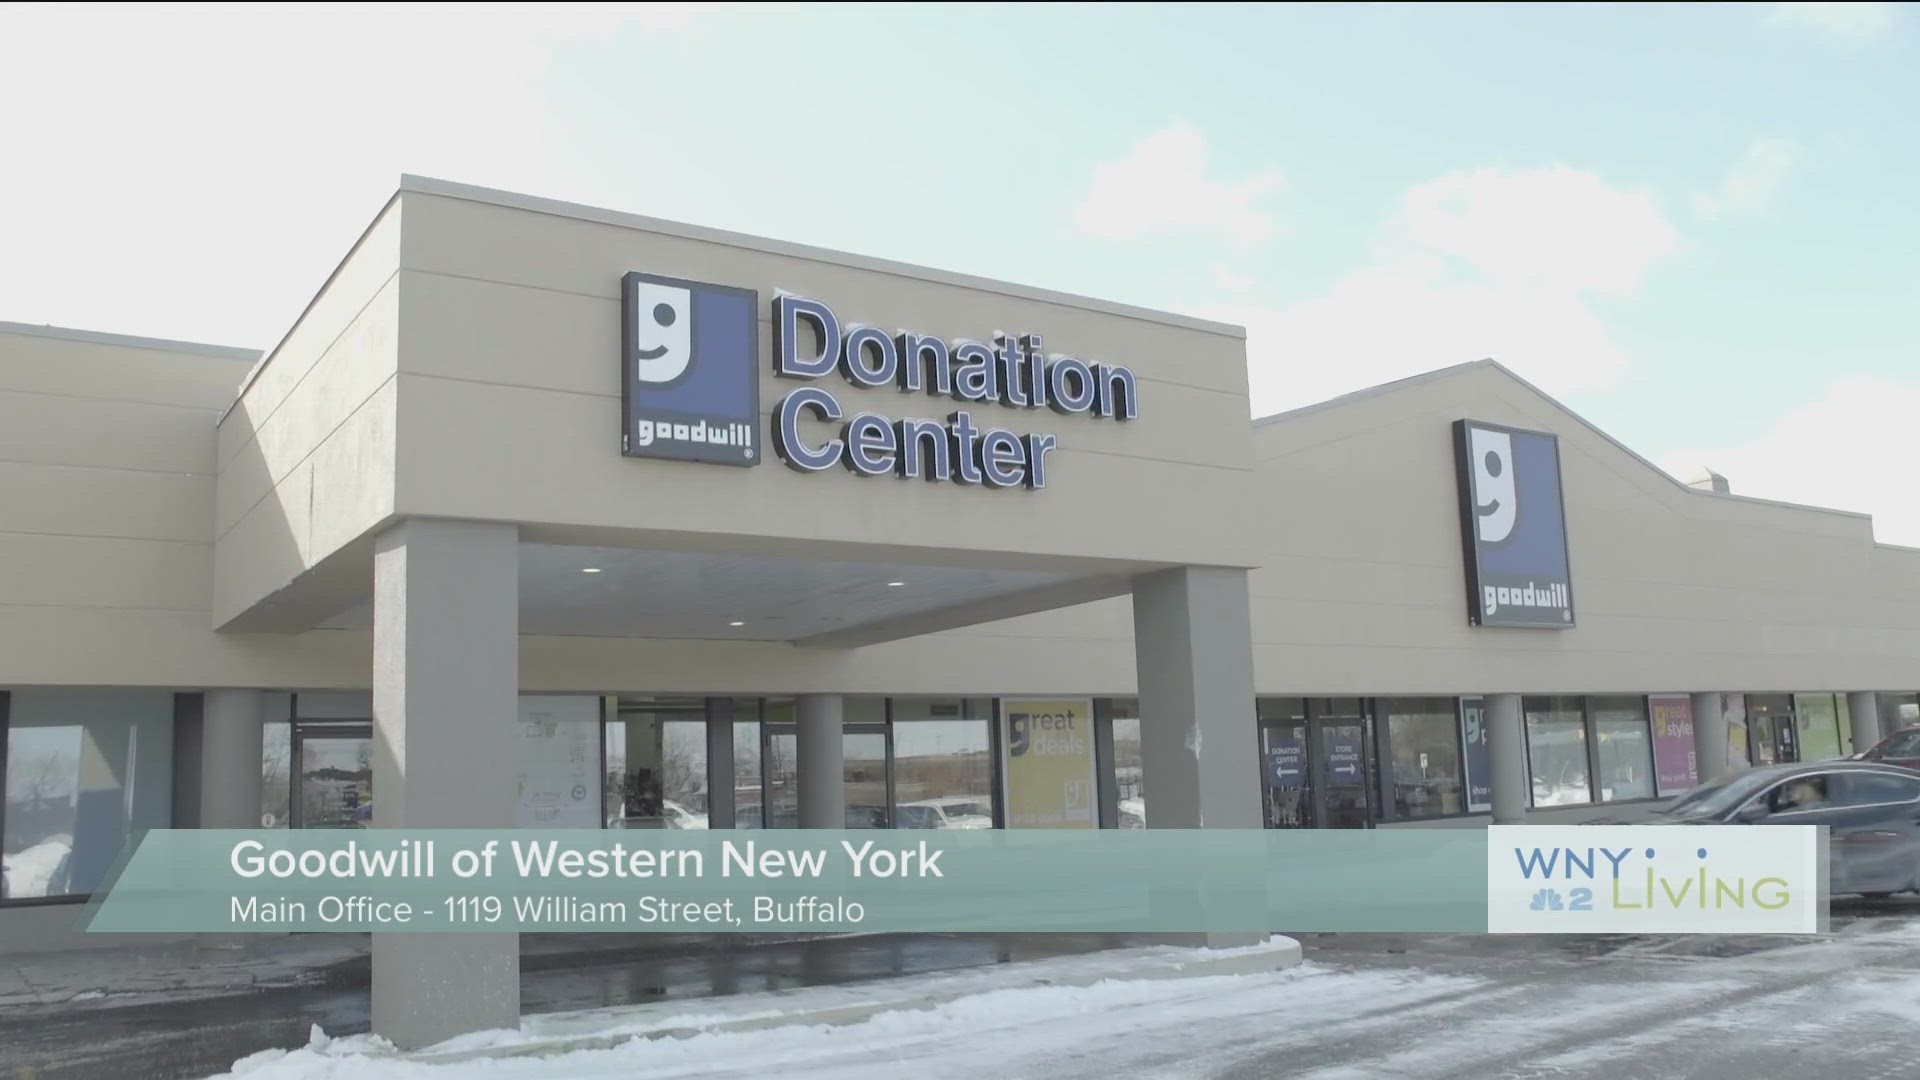 WNY Living - December 30 - Goodwill of Western New York (THIS VIDEO IS SPONSORED BY GOODWILL OF WESTERN NEW YORK)